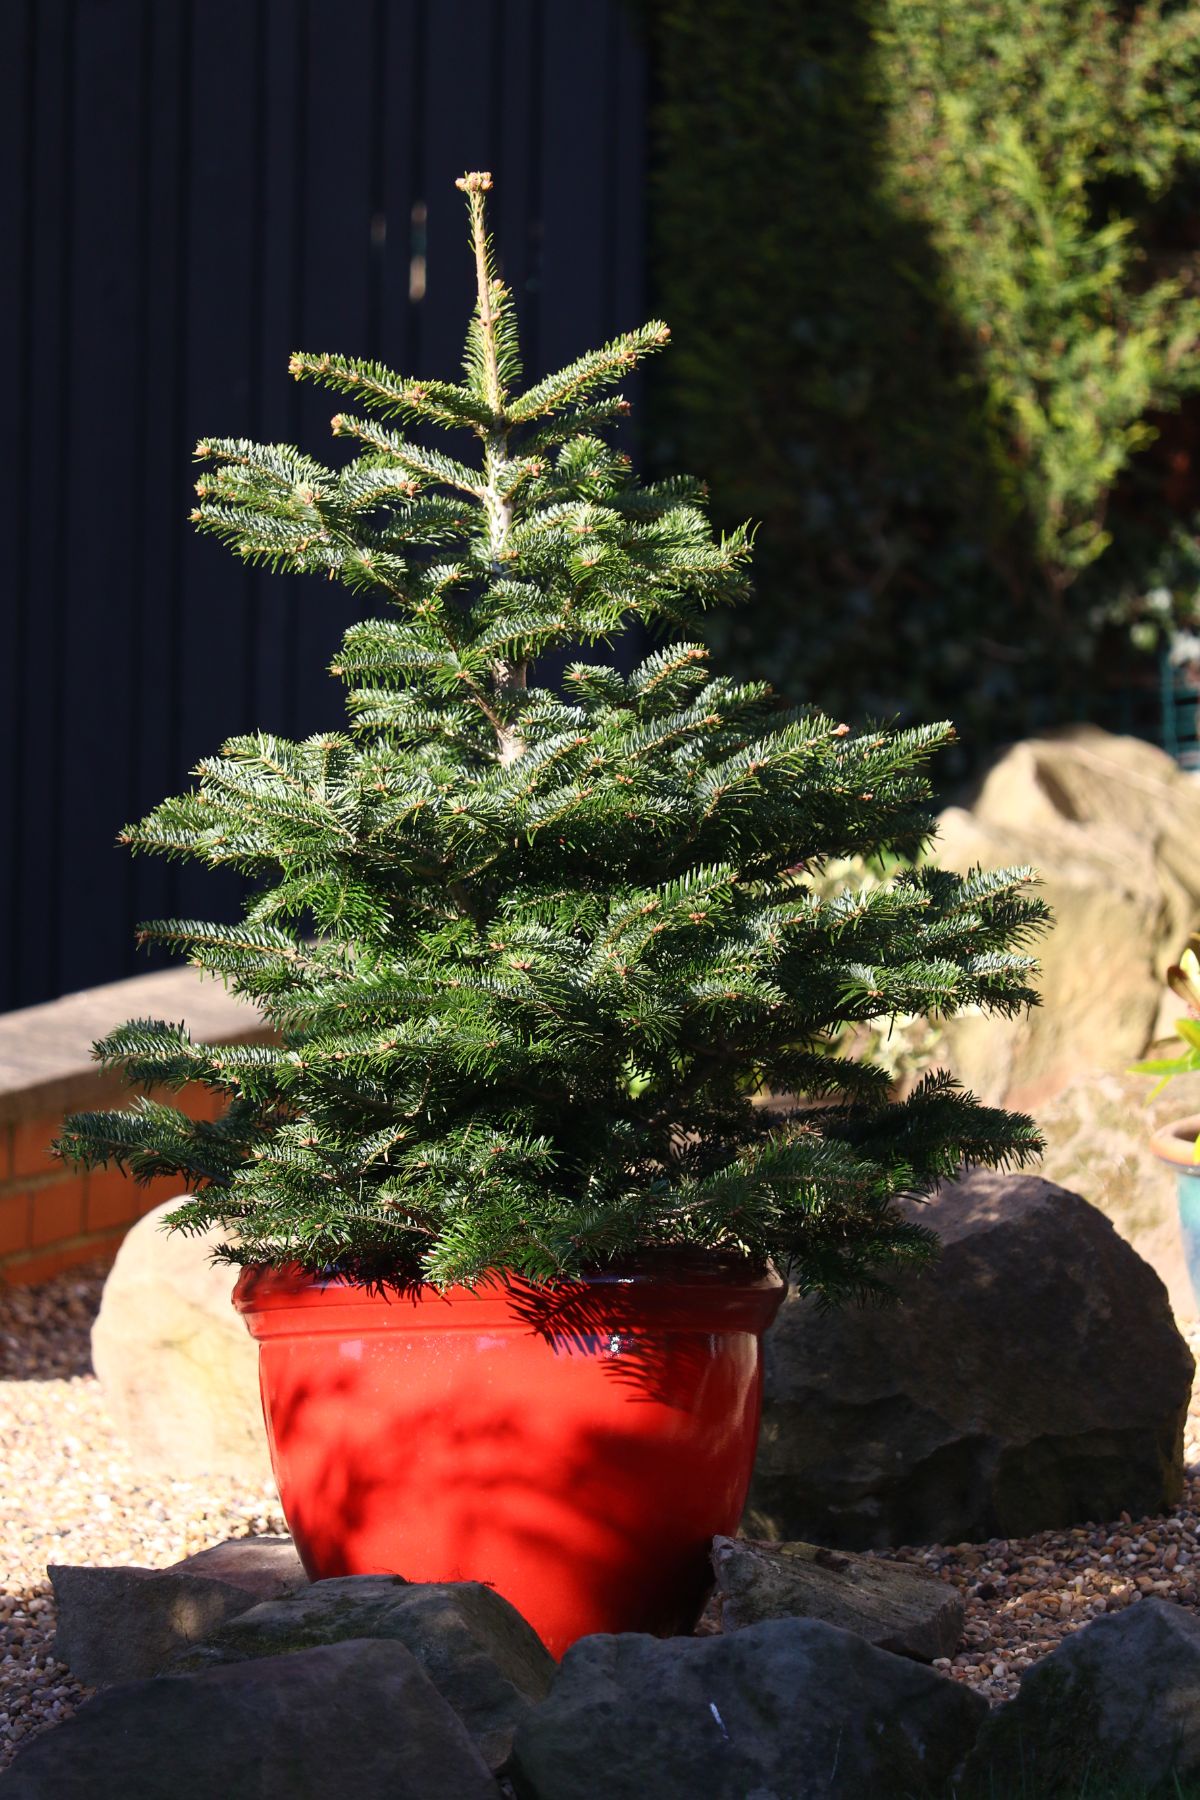 A potted living Christmas tree outdoors